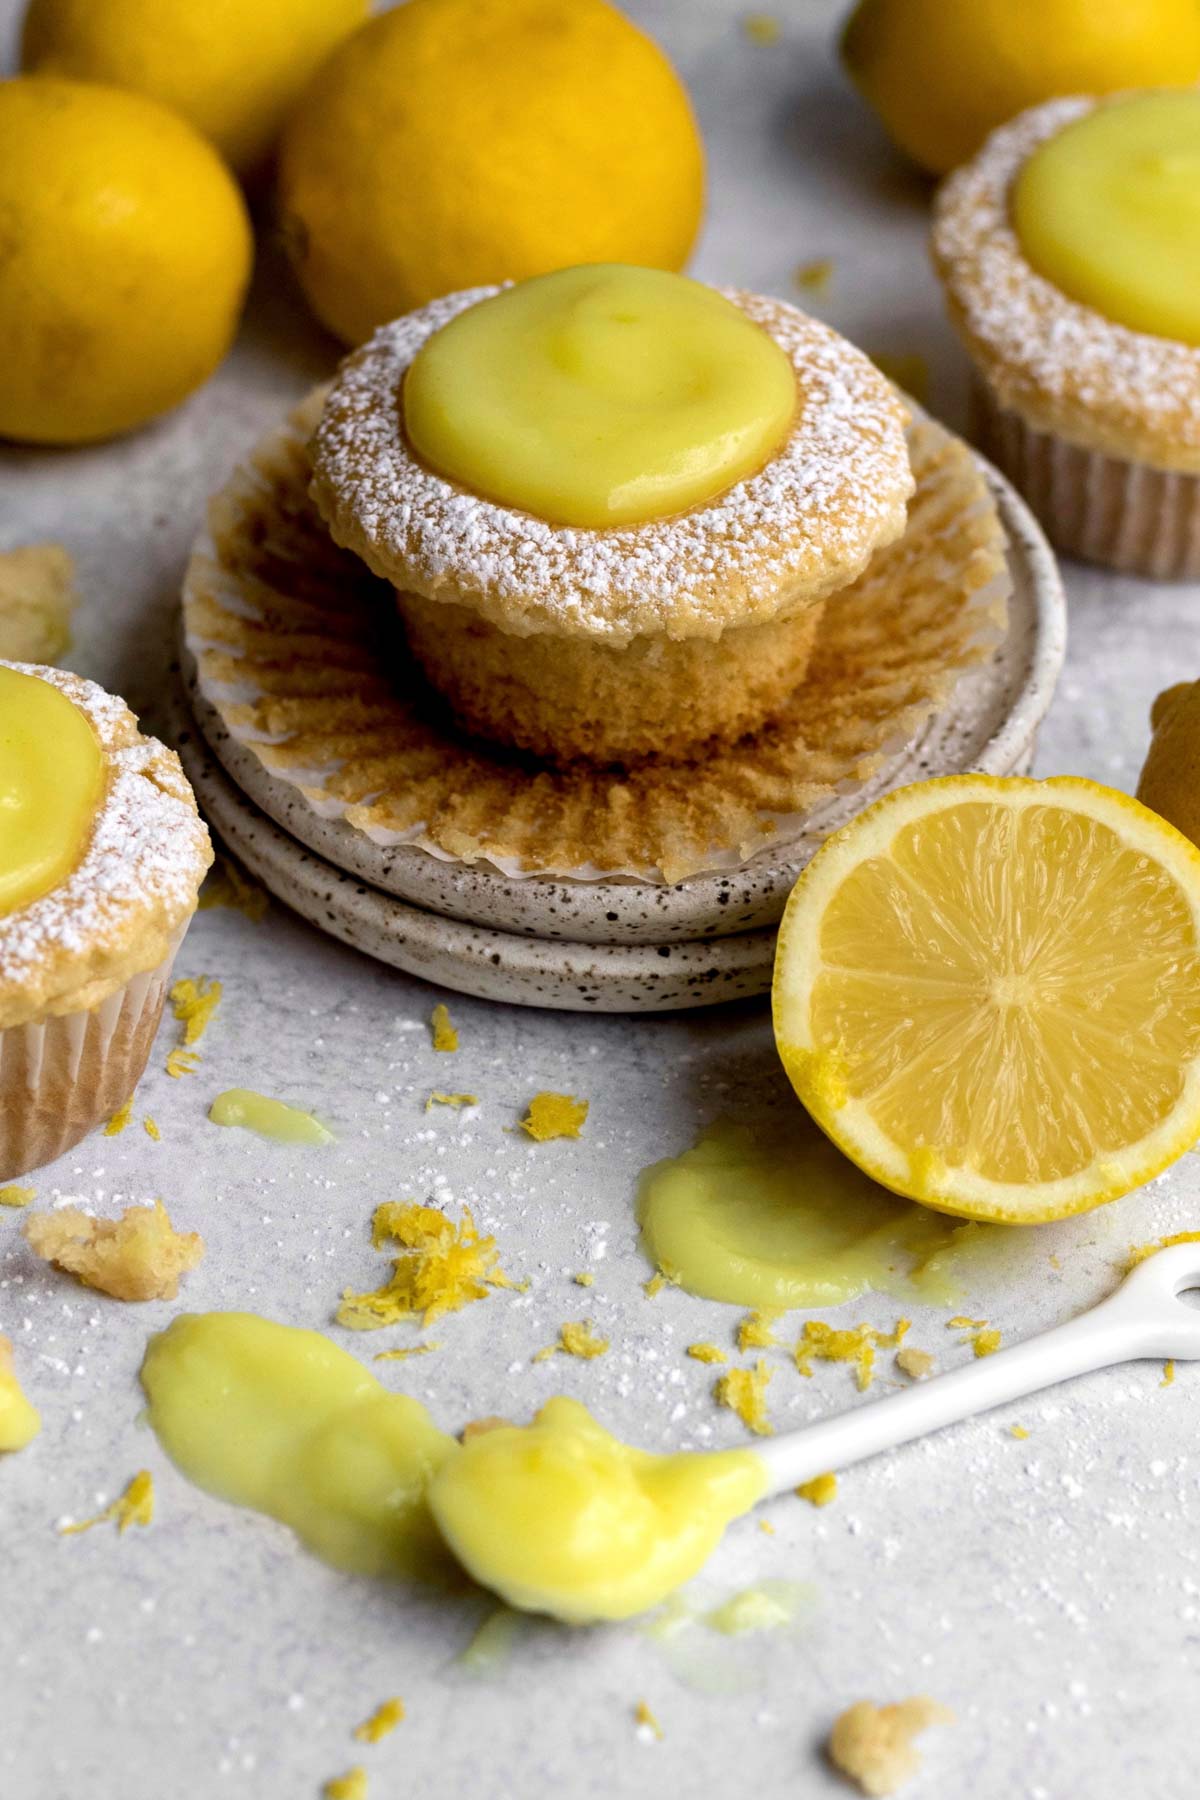 A stout Vegan Lemon Cupcake with lemon curd topping and confectioners’ sugar.